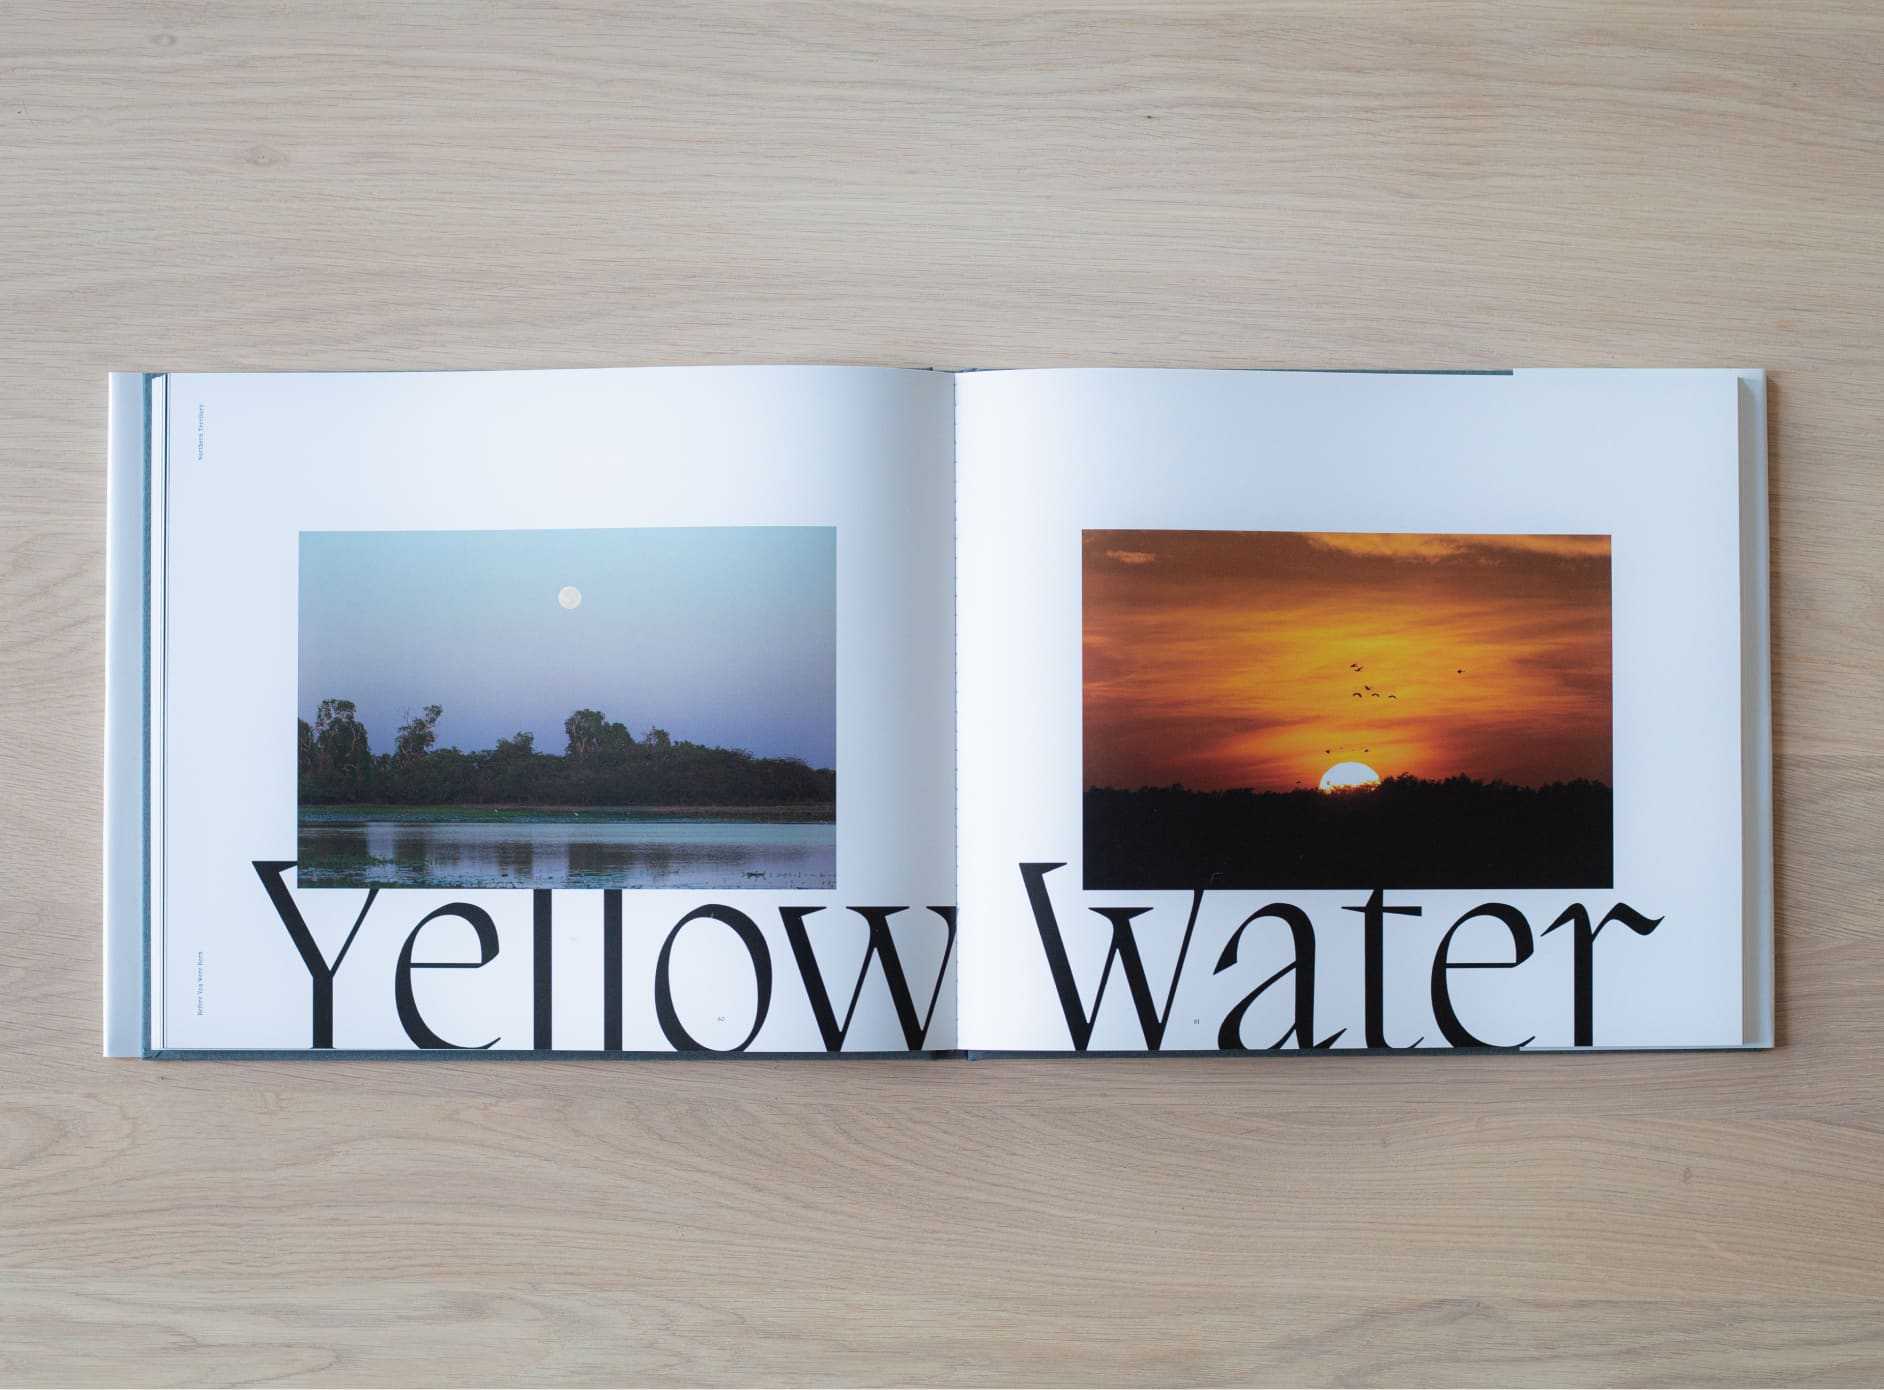 The before you were born book open on a double page spread of Yellow Water.